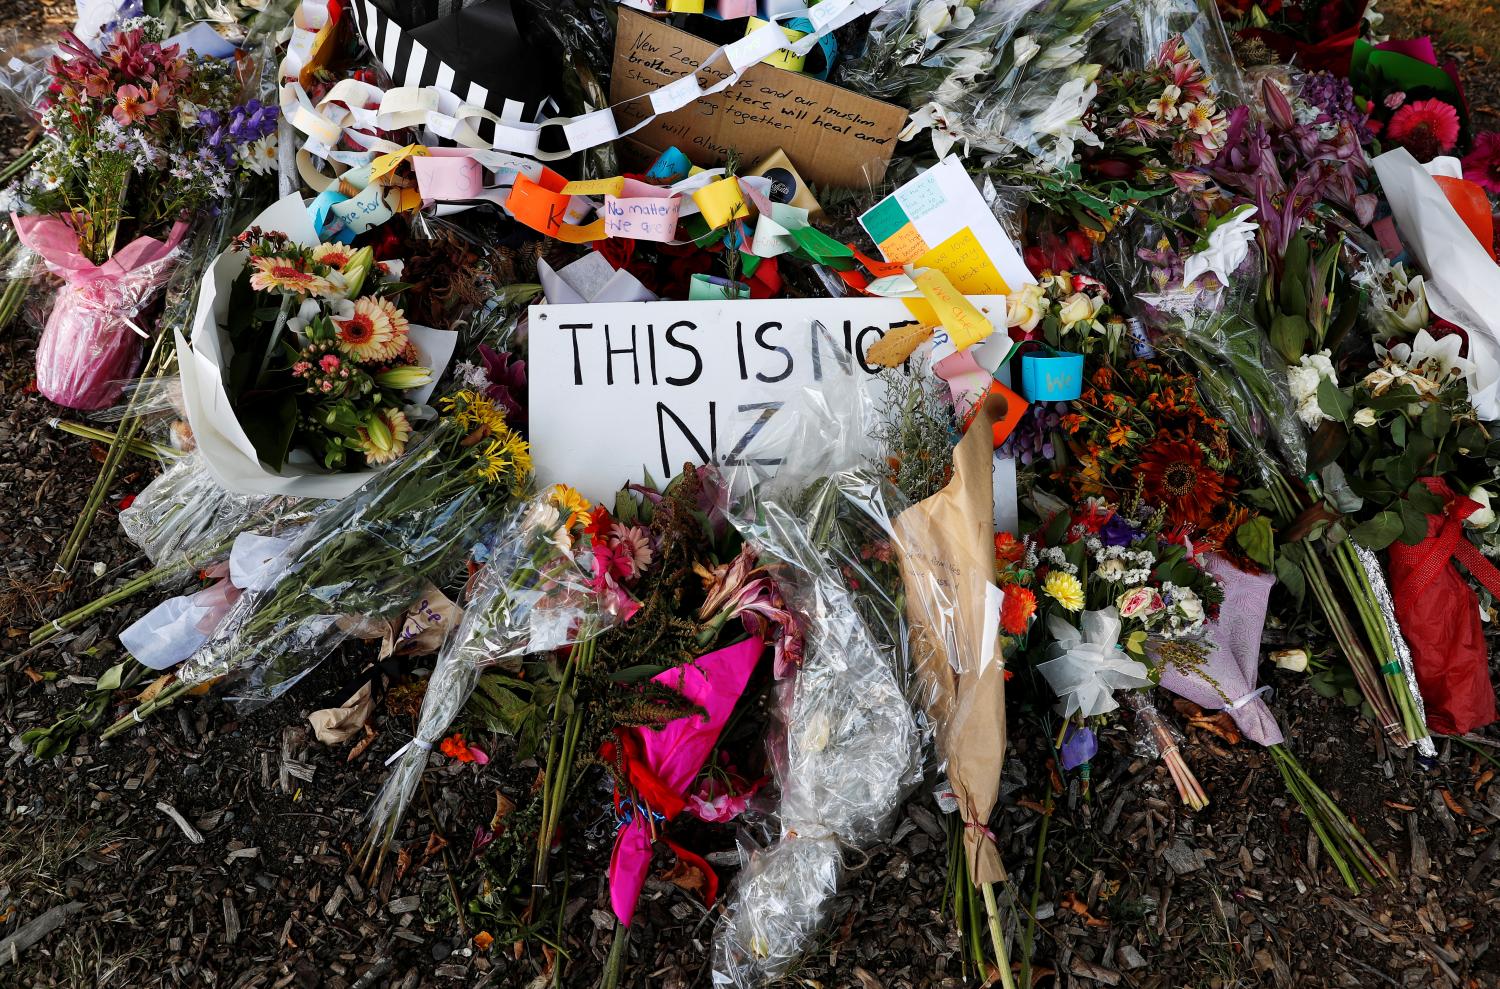 Flower tributes are pictured outside Al-Noor mosque after it was reopened in Christchurch, New Zealand March 23, 2019. REUTERS/Edgar Su